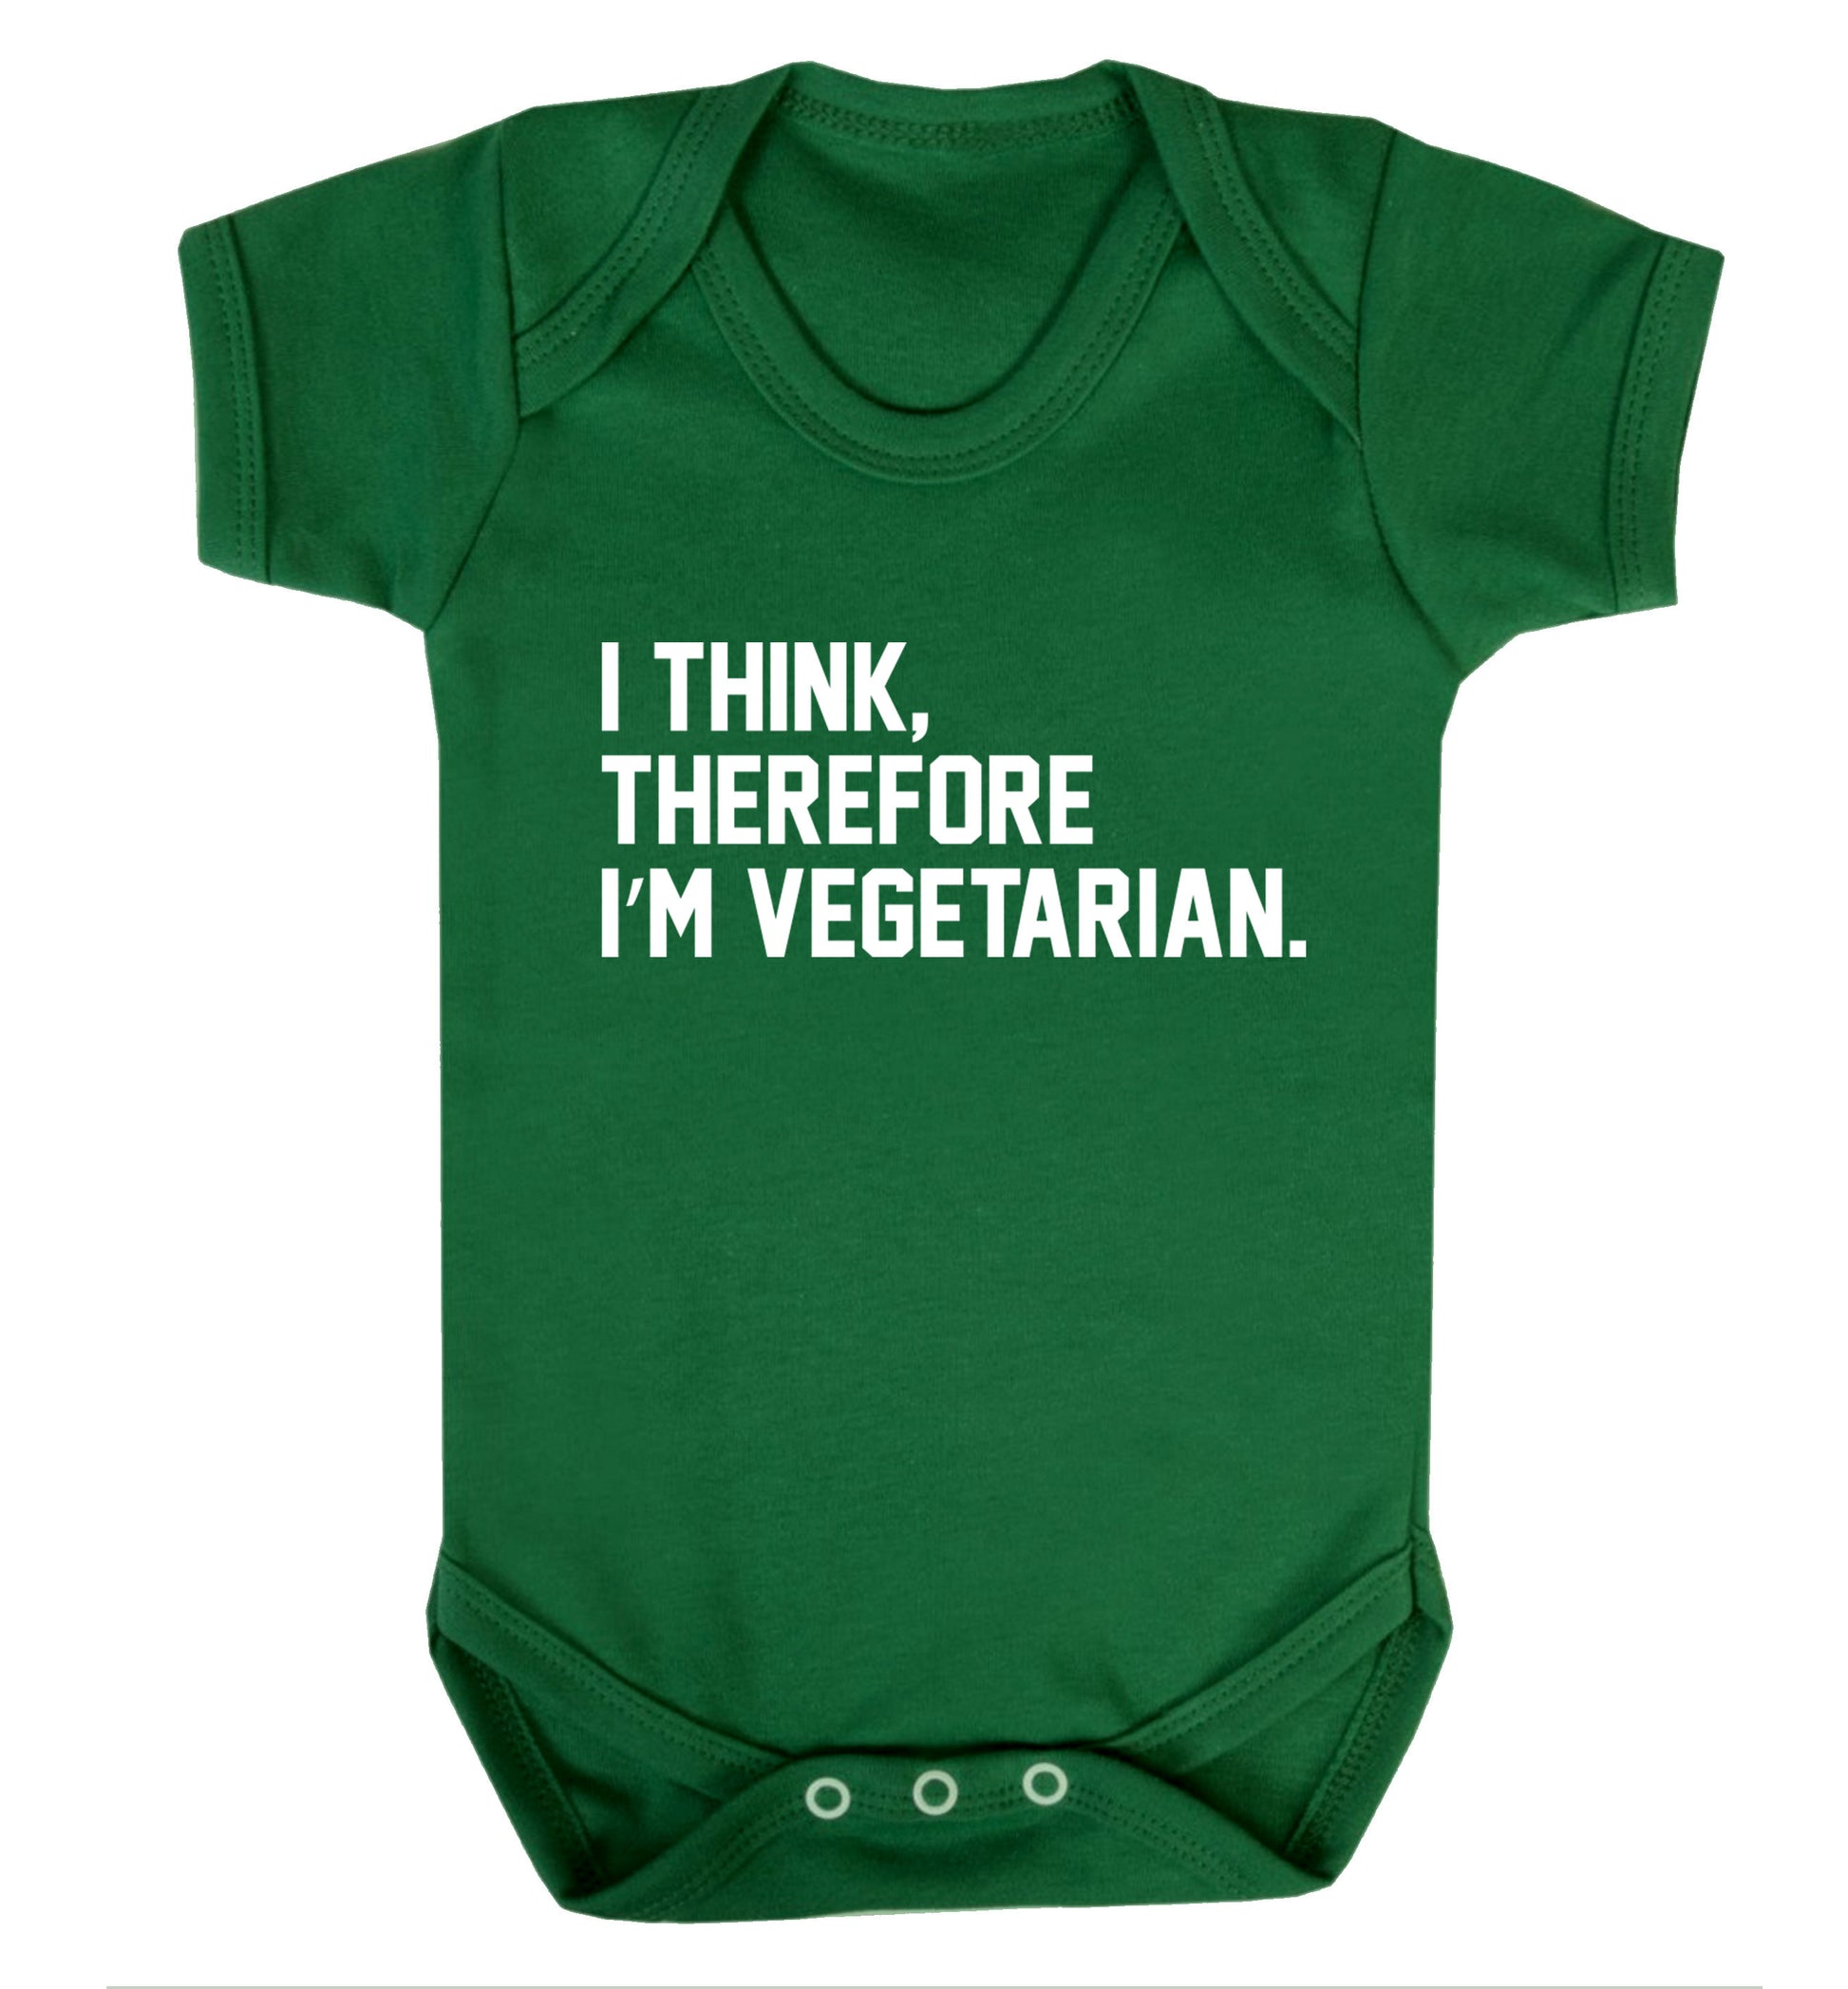 I think therefore I'm vegetarian Baby Vest green 18-24 months